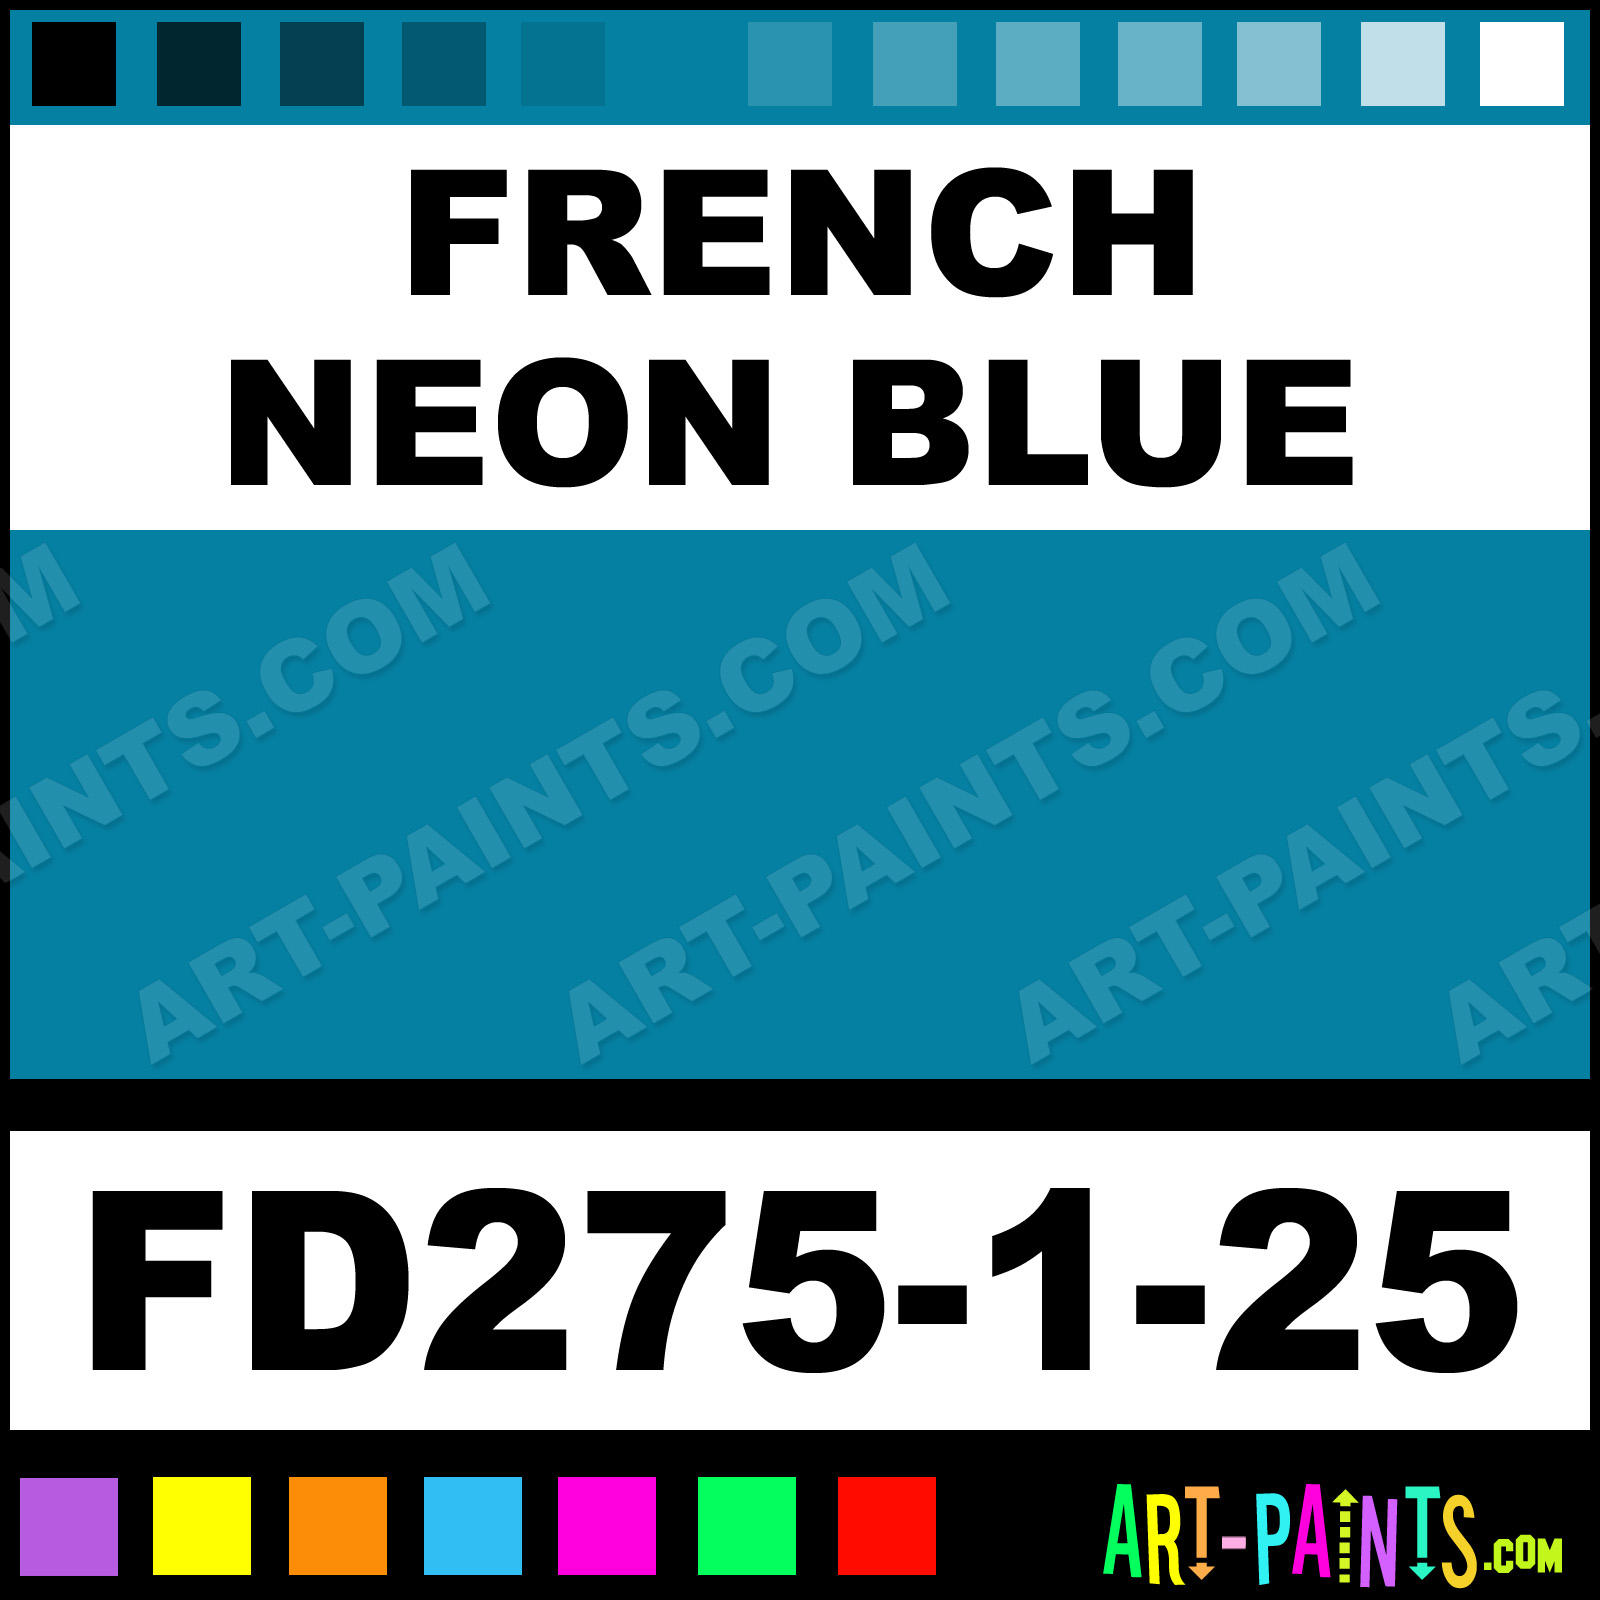 French Neon Blue French Dimensions Ceramic Paints Fd275 1 25 French